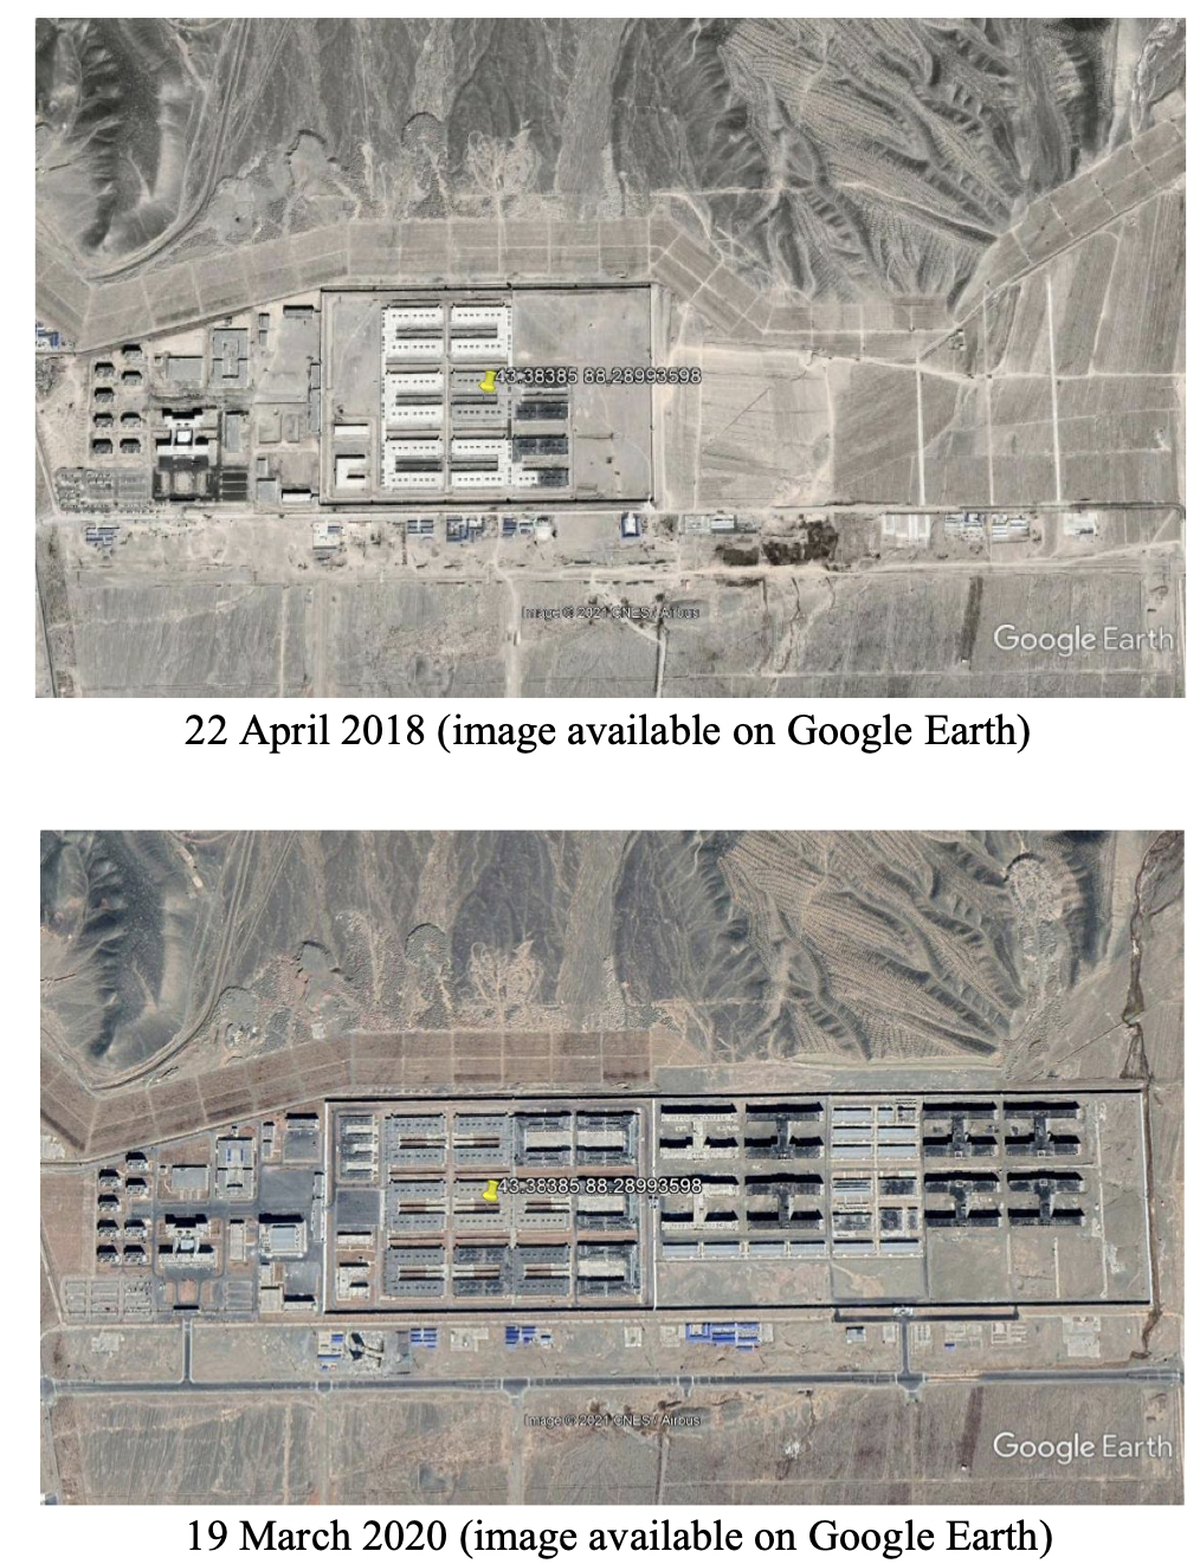 Detention centres have expanded with more security features, especially after 2019. Shown above are satellite images of the Urumqi No.3 Detention Centre in Dabancheng that has increased in size from 2018 to 2020, with the number of buildings on the compound increased from 40 in 2018 to 68 in 2019 and 92 in 2020.